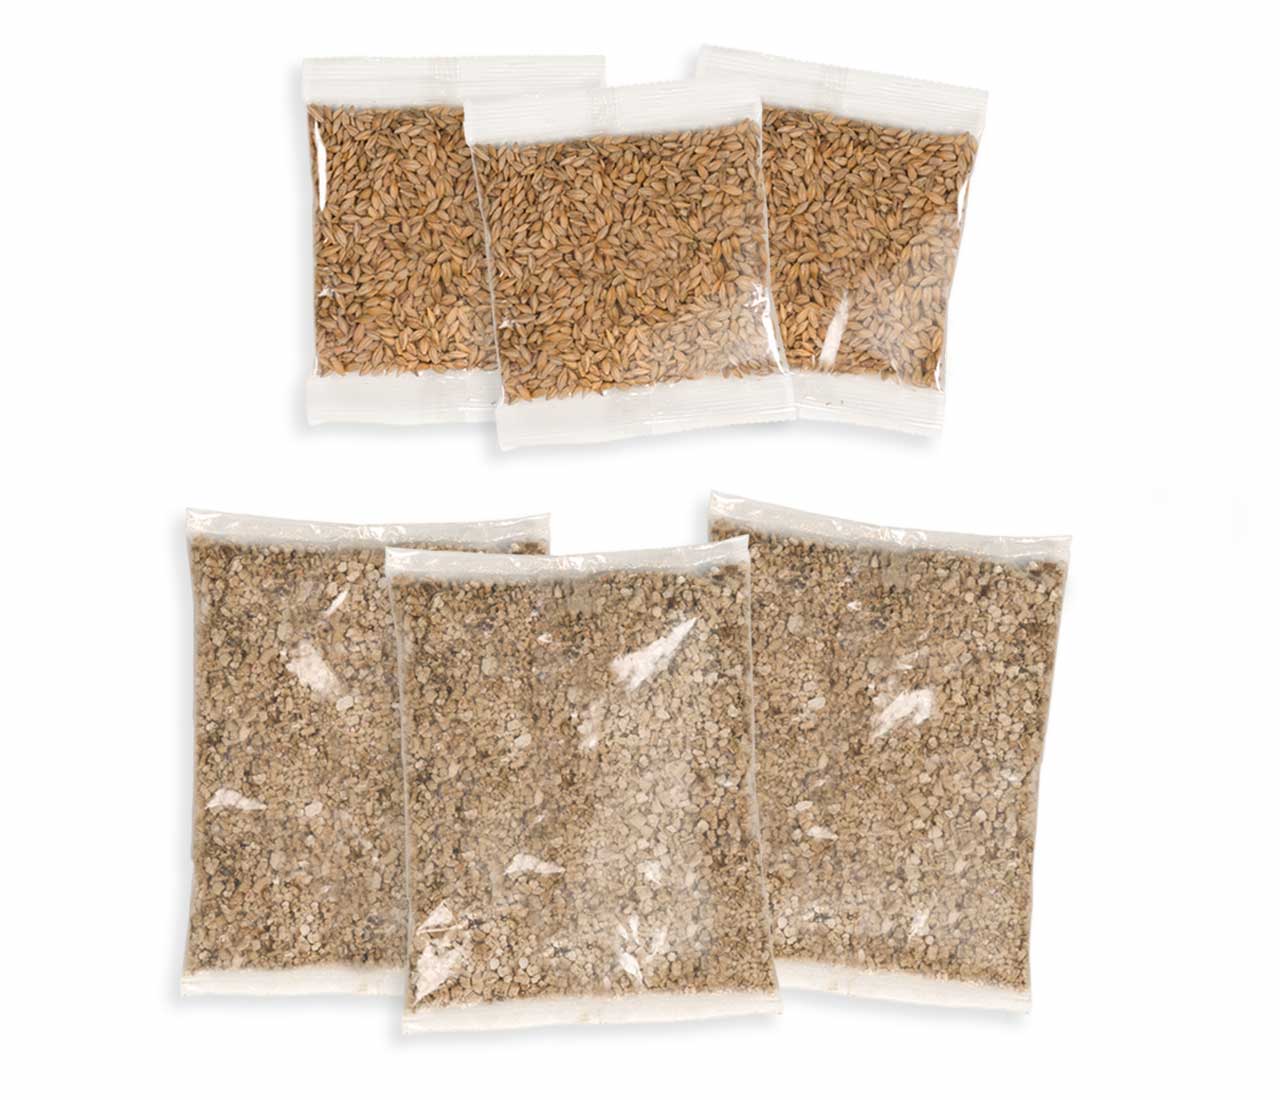 3 bags of seeds and 3 bags of vermiculite to grow cat grass